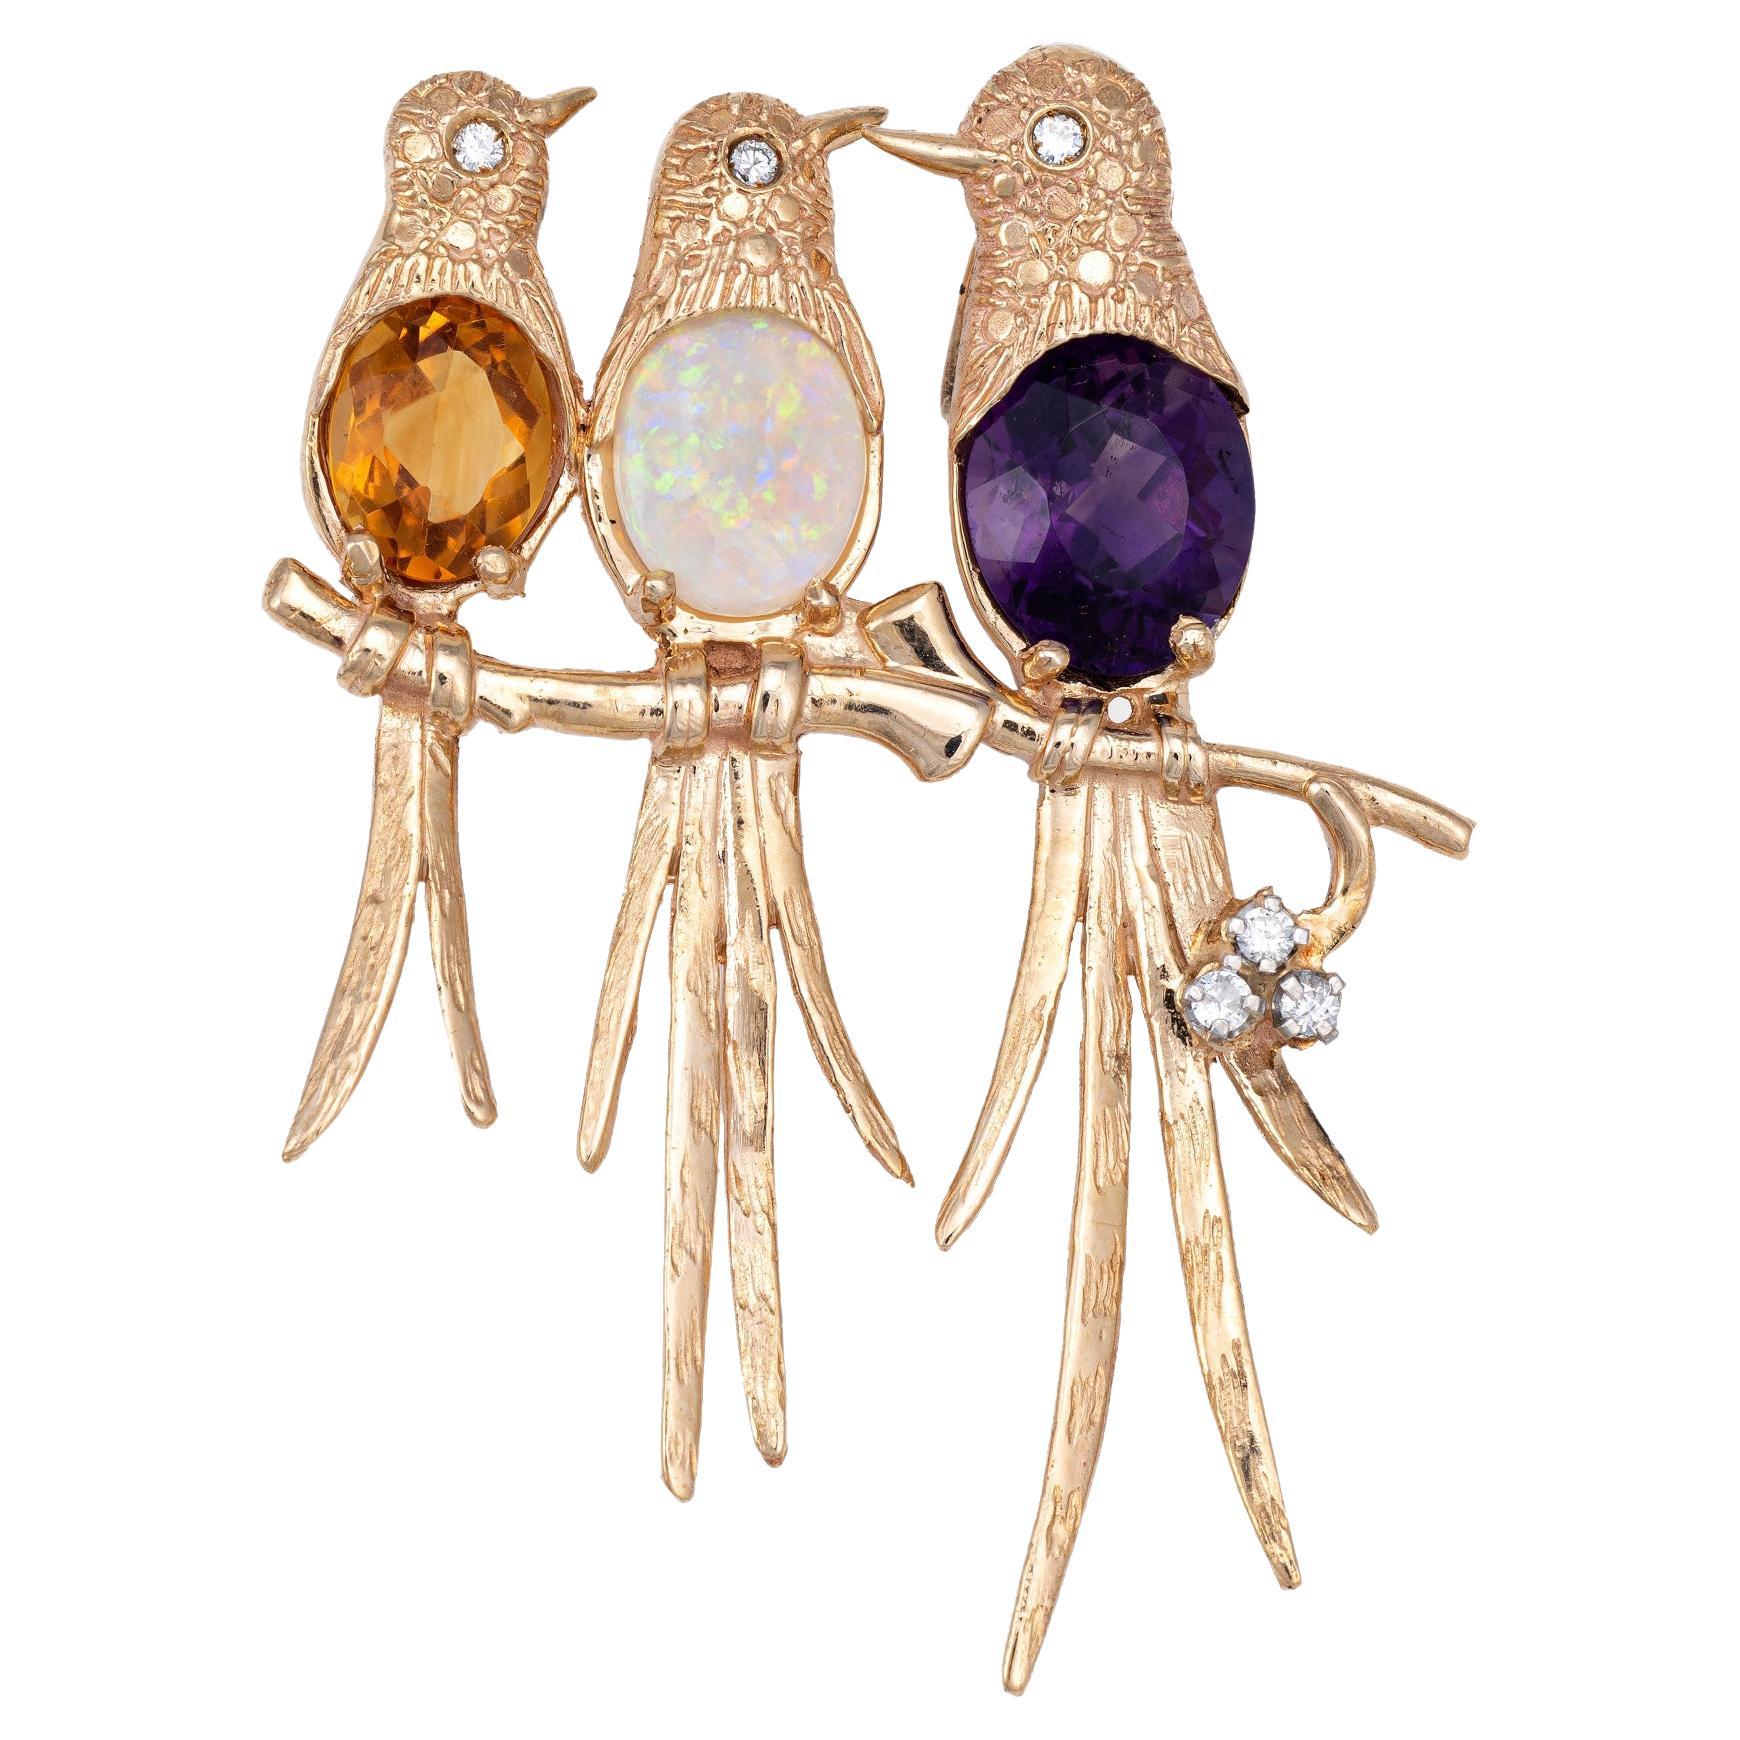 Three Birds on a Branch Pendant Vintage 14k Yellow Gold Amethyst Opal Jewelry For Sale